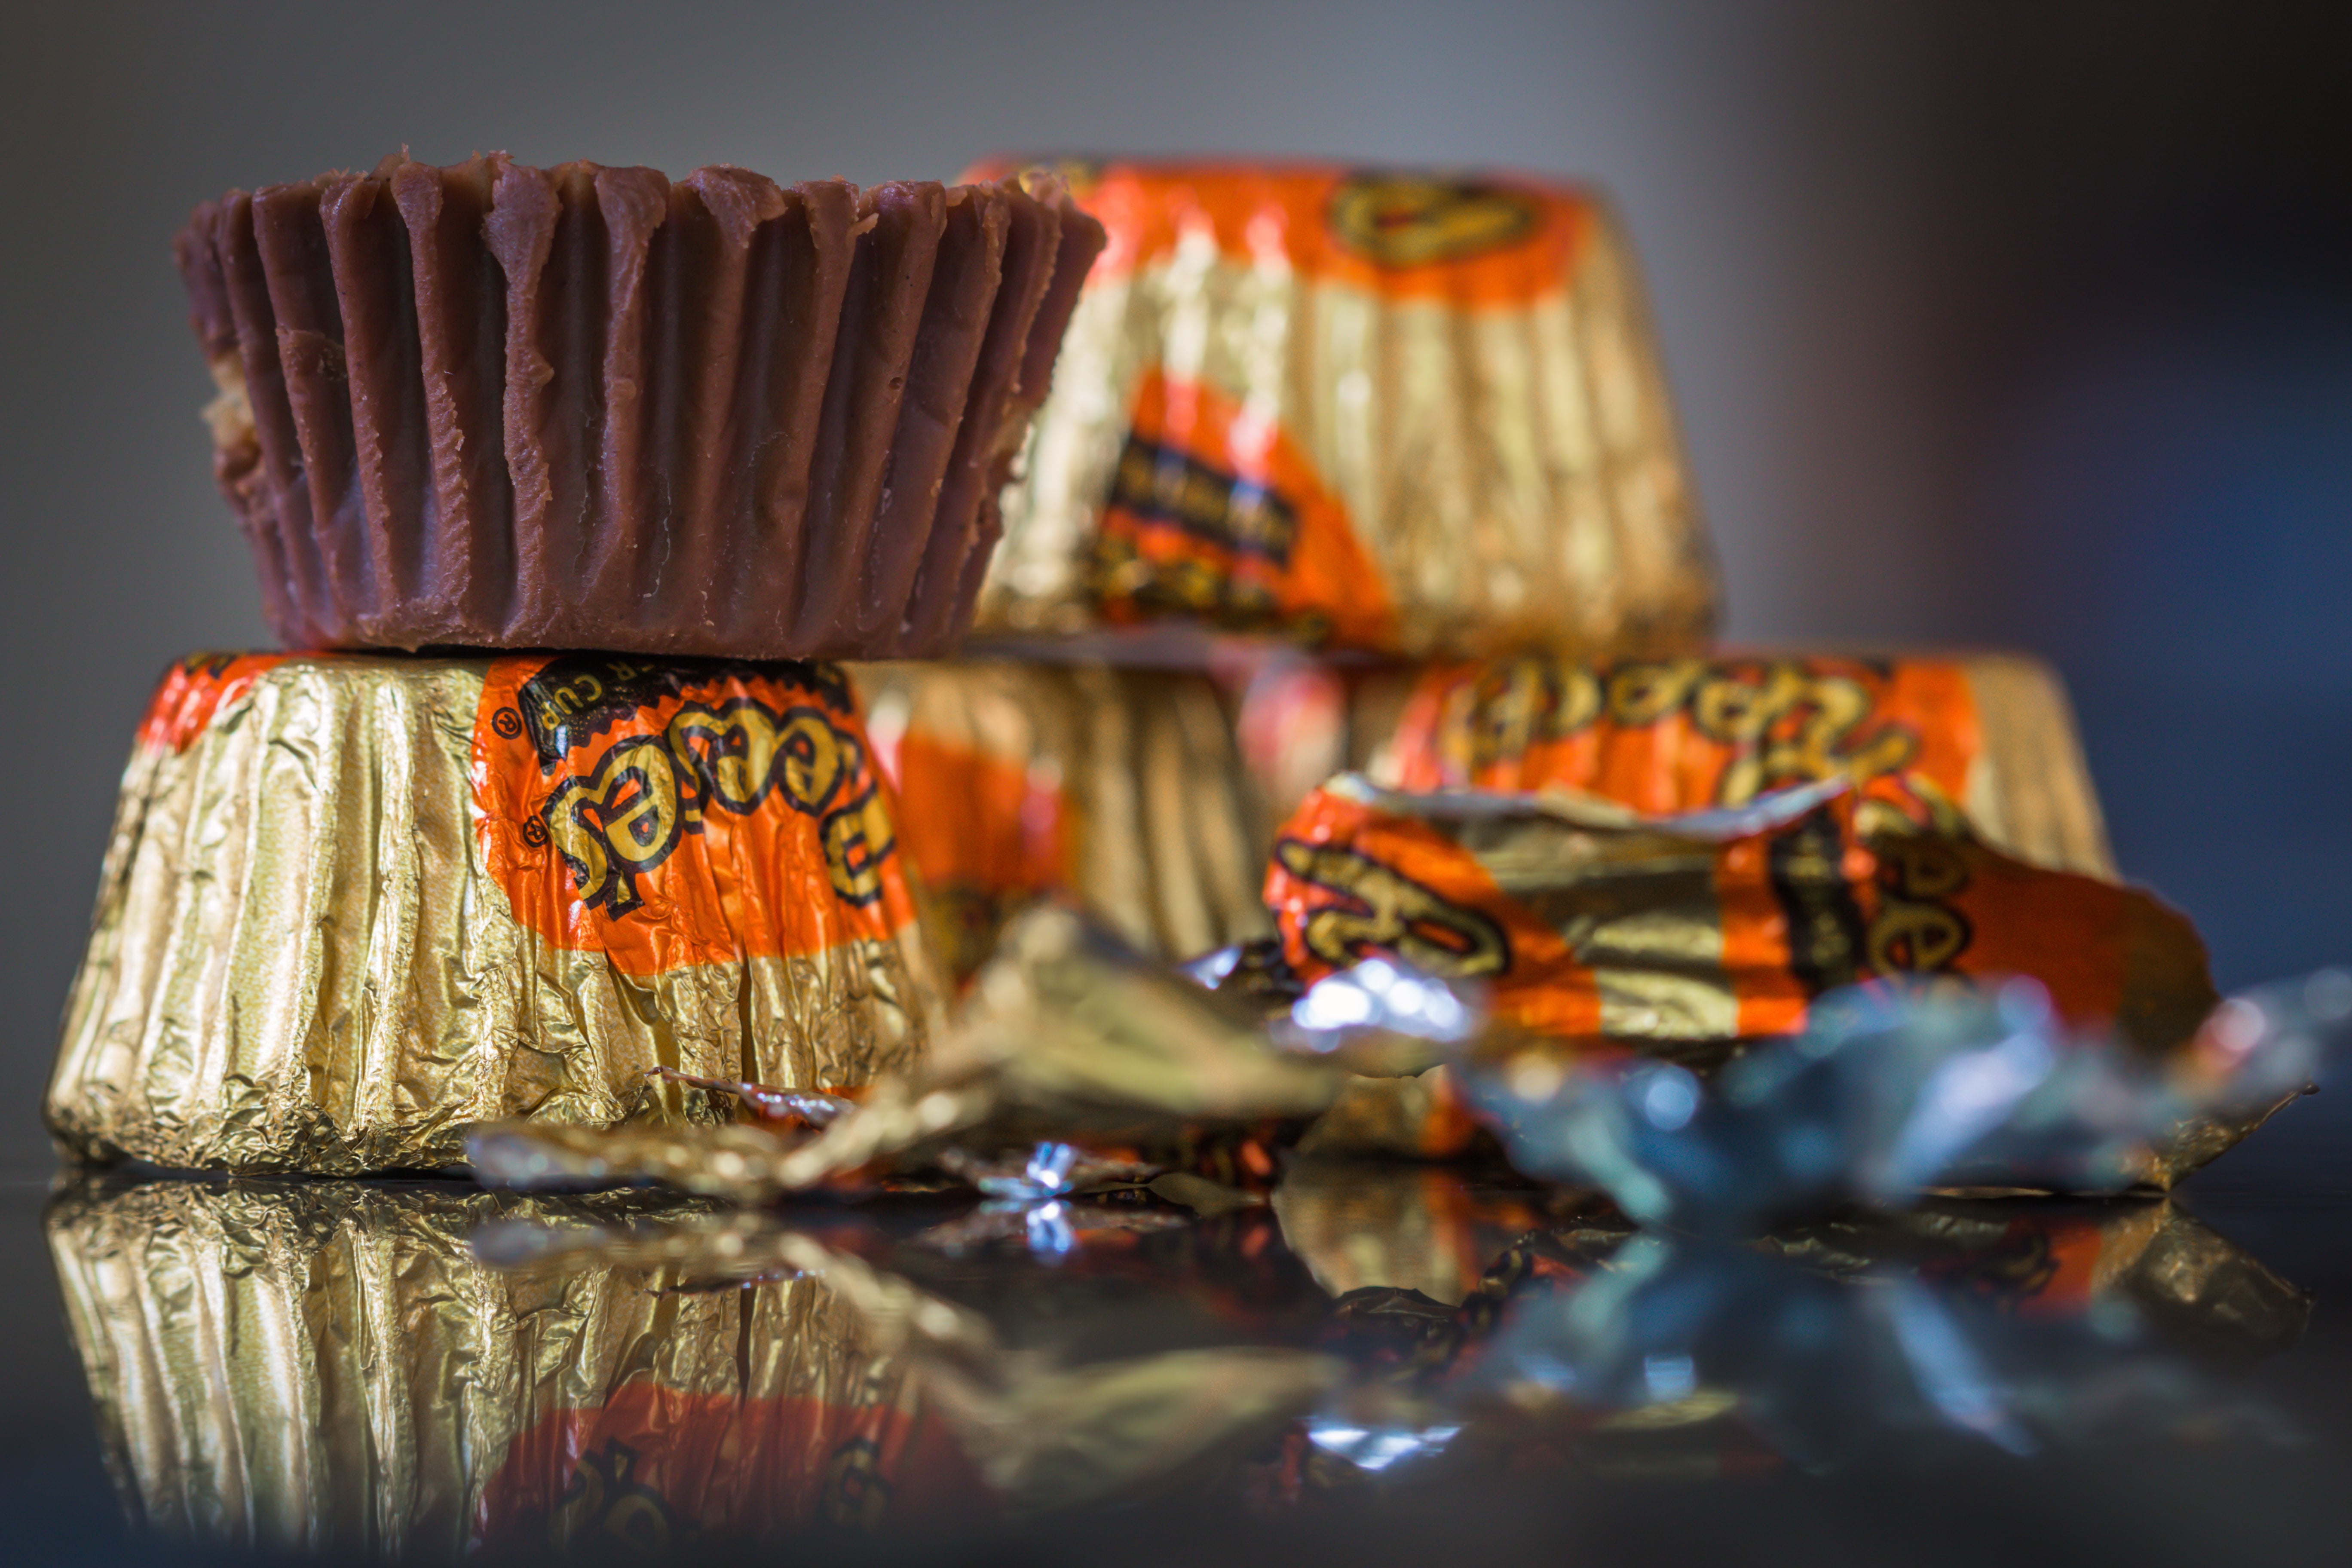 7 Things You Didn't Know About Reese's Pieces—